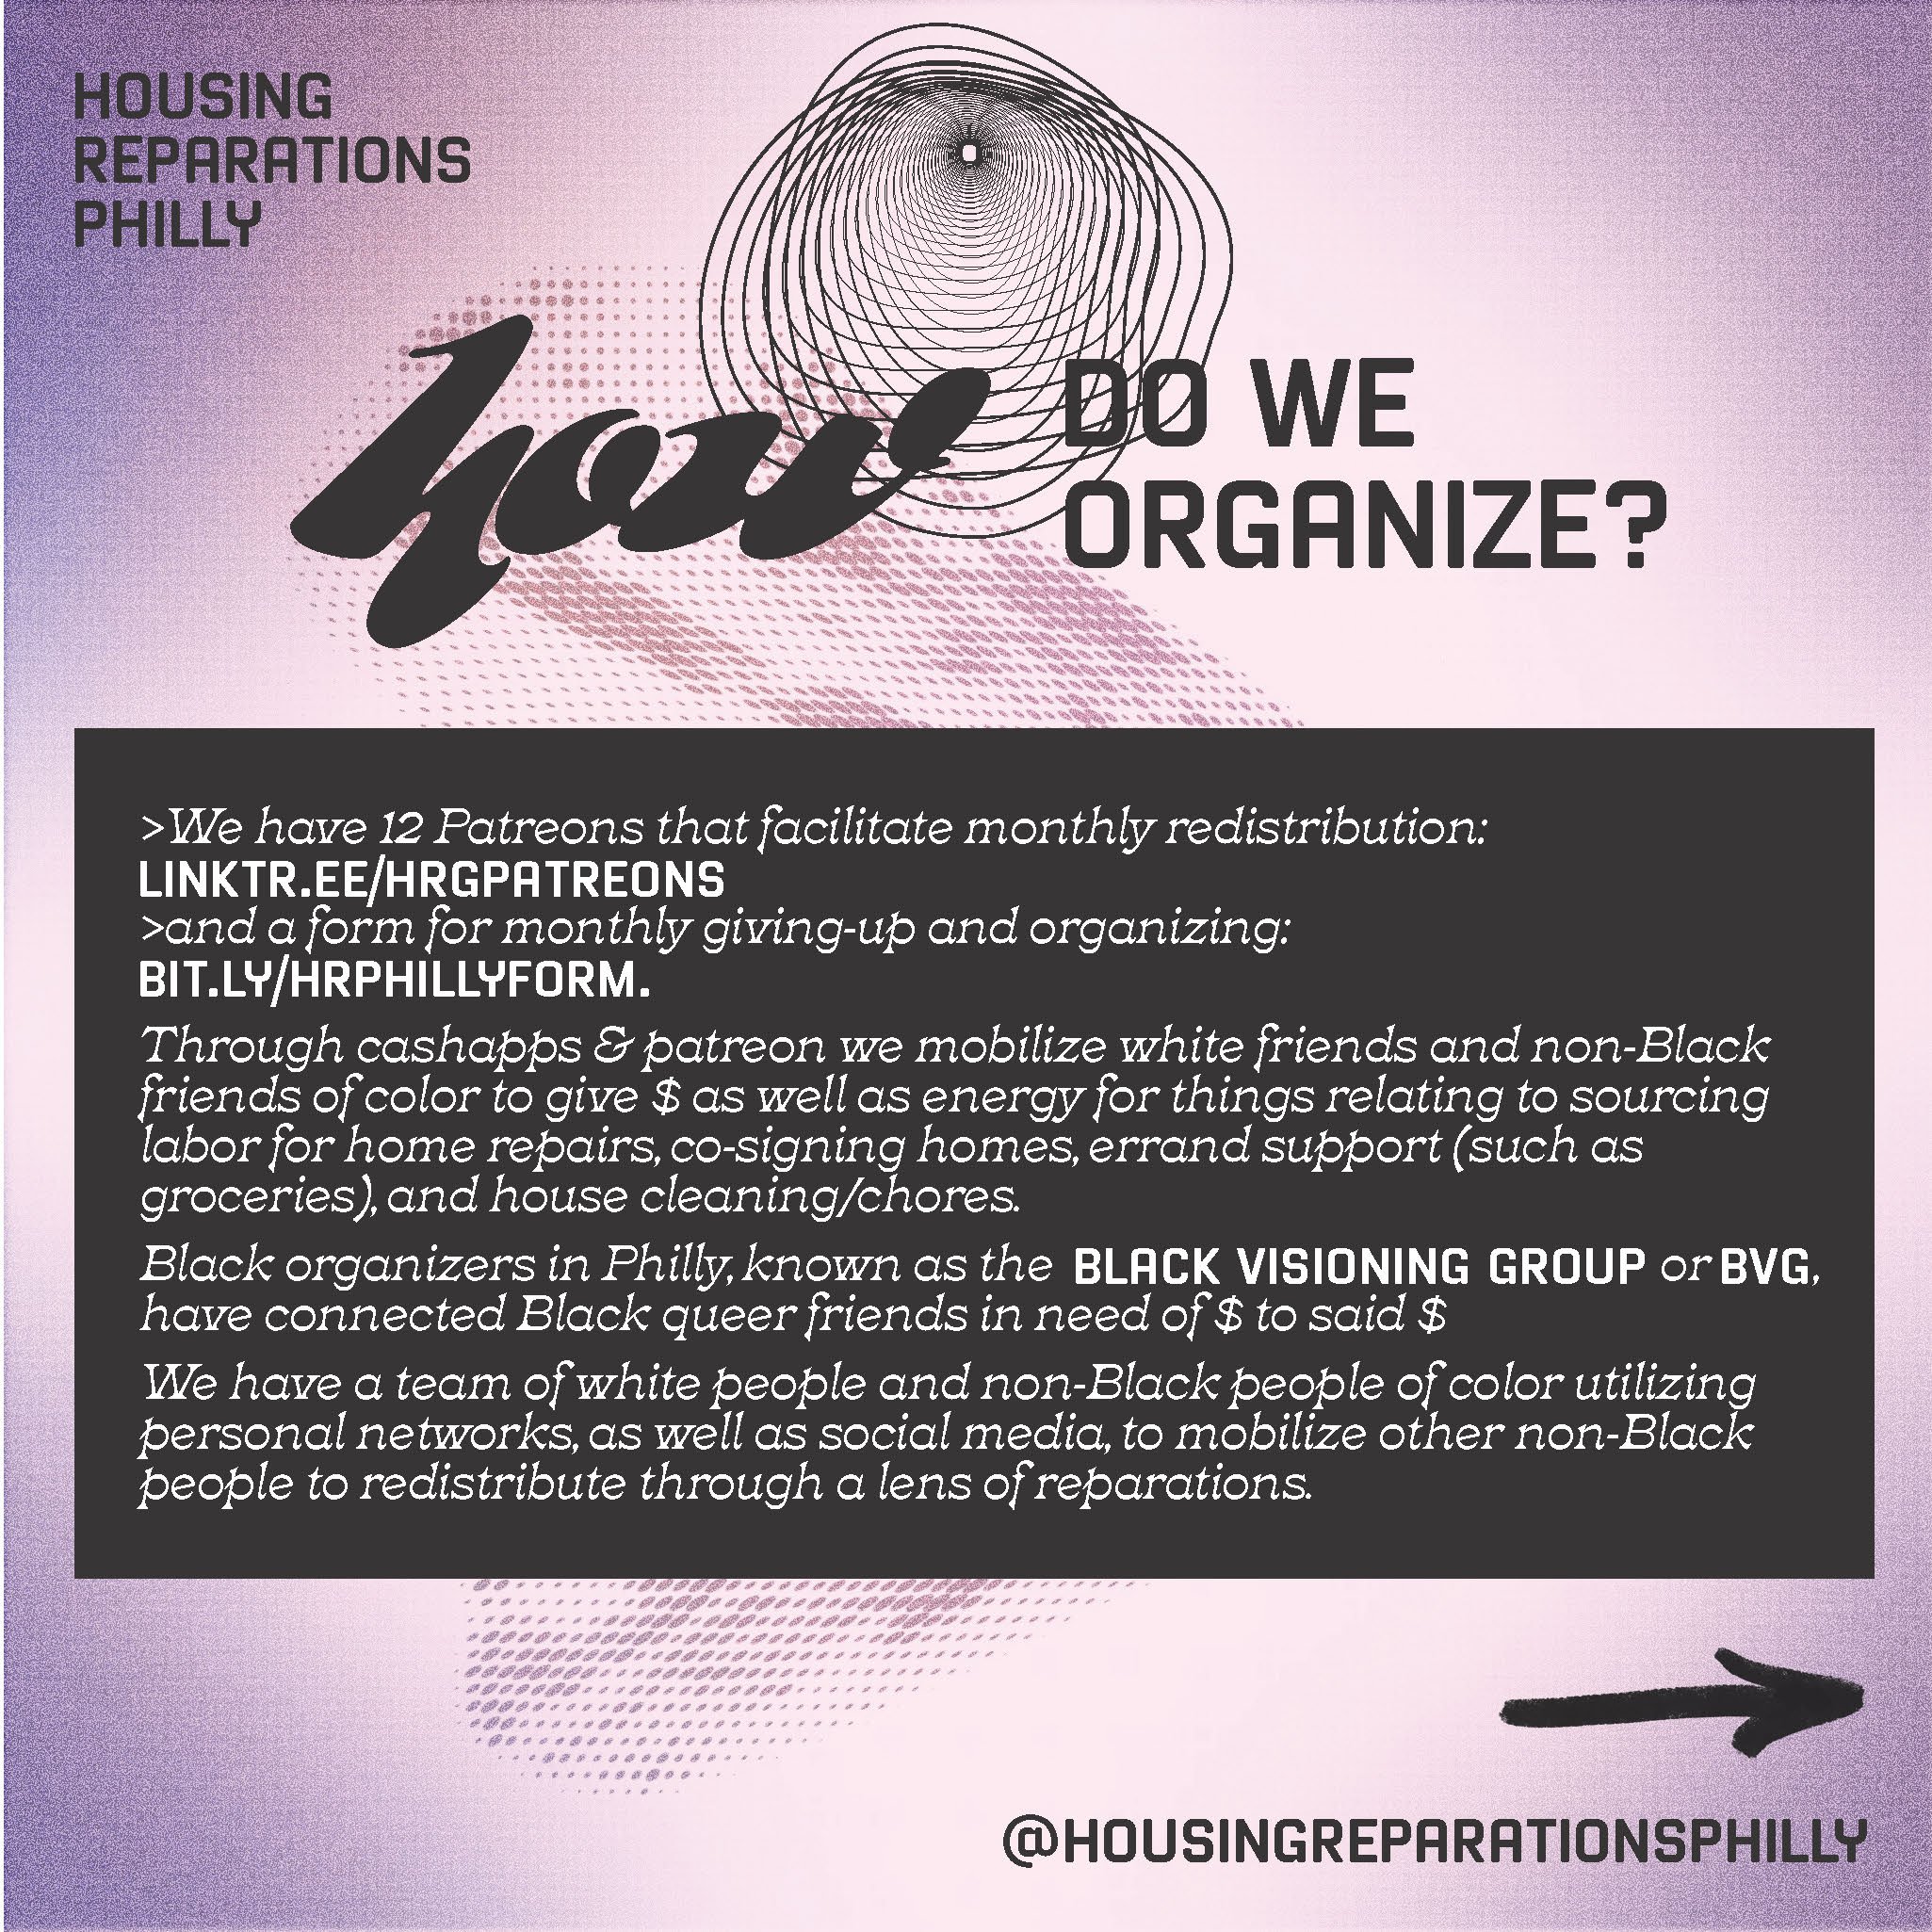 Reintroduction, Social Media Slides for Housing Reparations Philly 